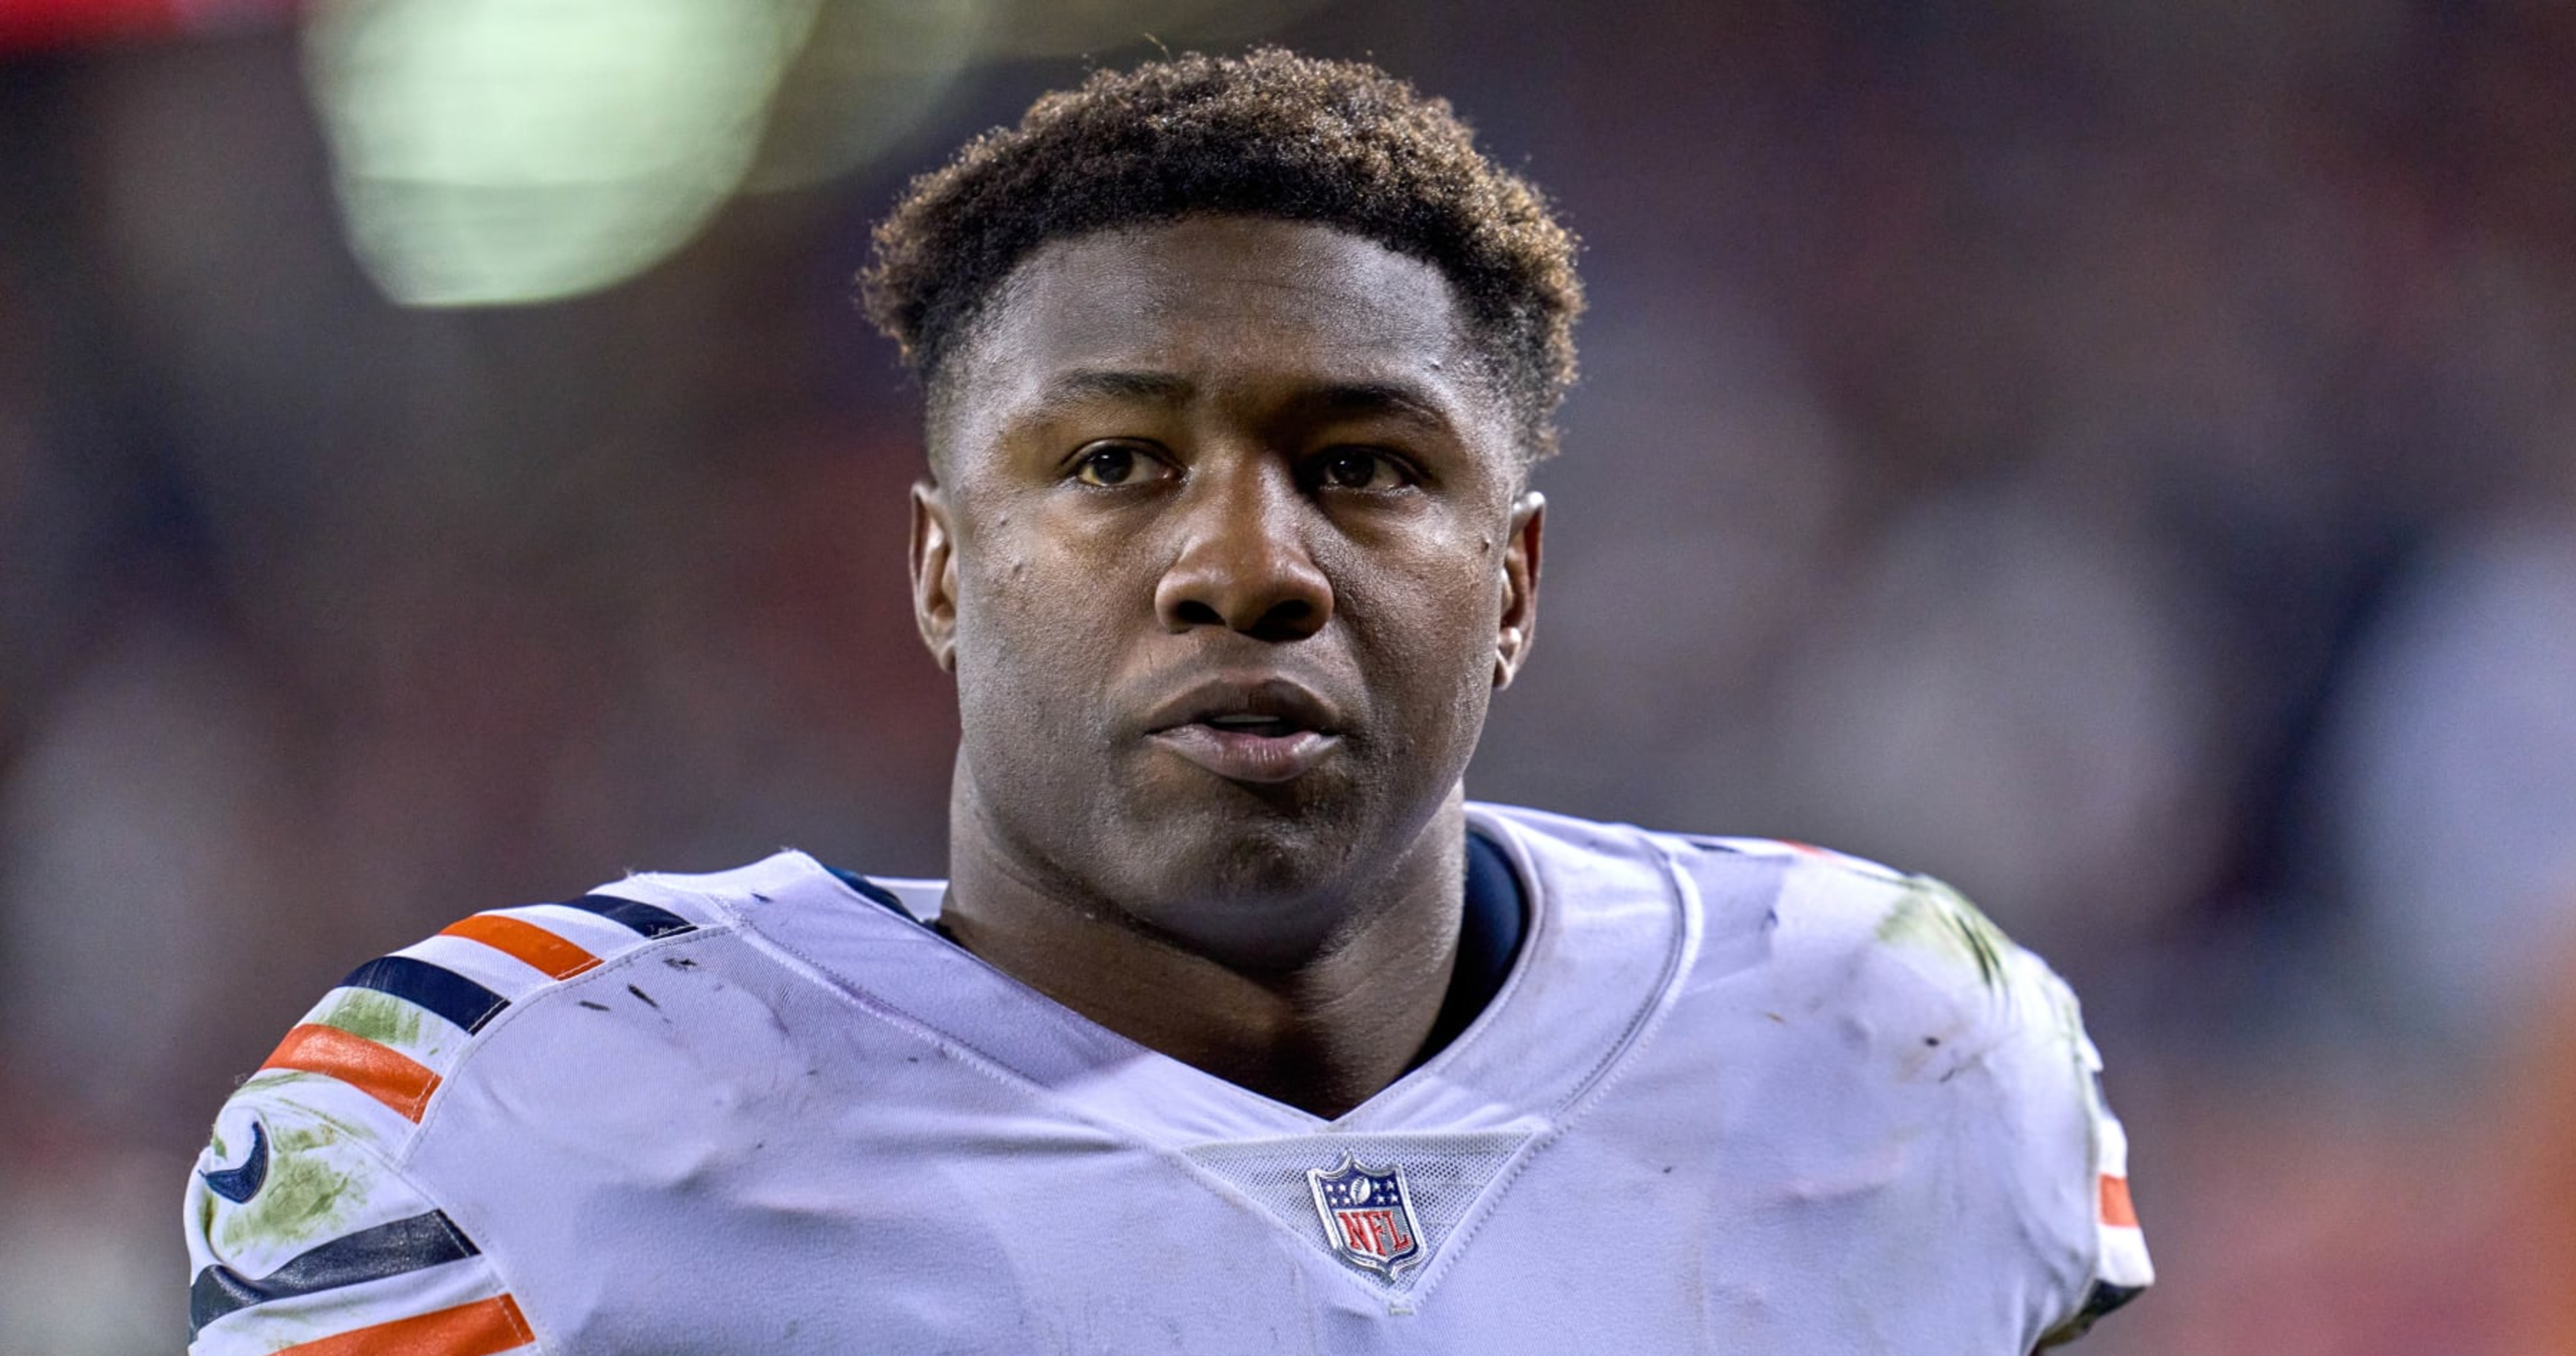 Bears Rumors: Roquan Smith Top-Paid LB Offer 'Not Real'; Contract 'Way Backloade..